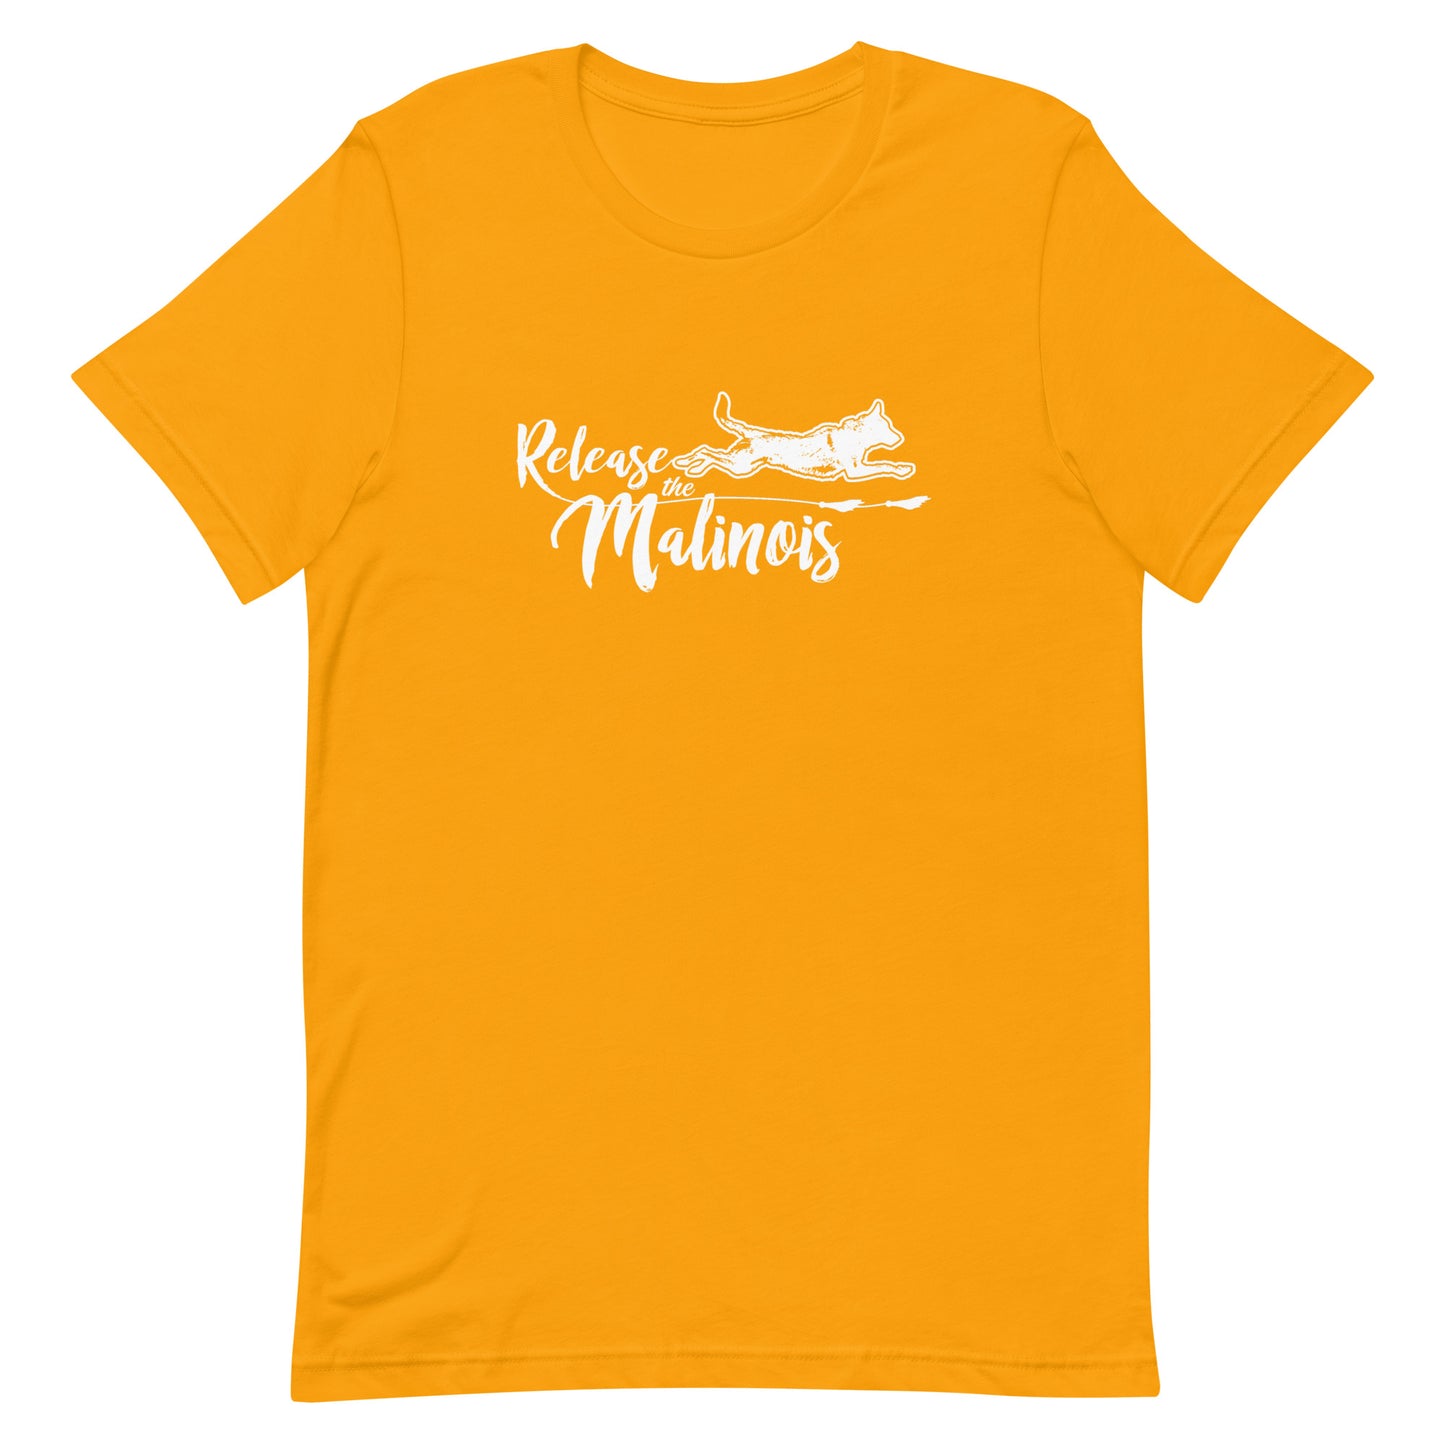 RELEASE THE MALINOIS - Unisex t-shirt